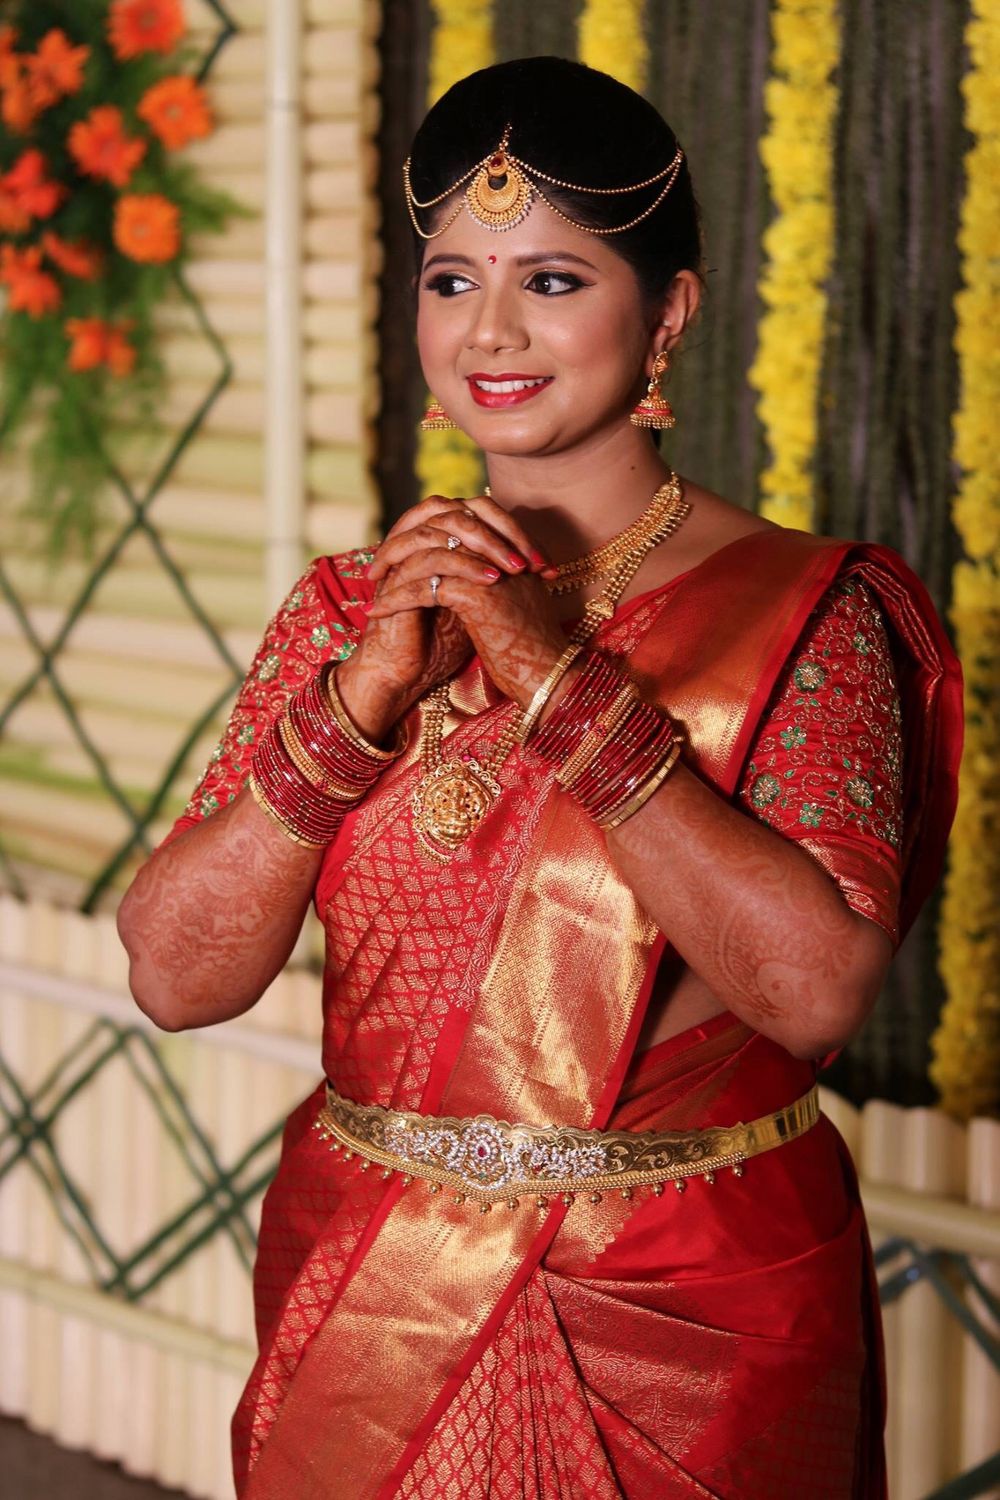 Photo From Aisiri wedding - By Makeup By Varalakshmi